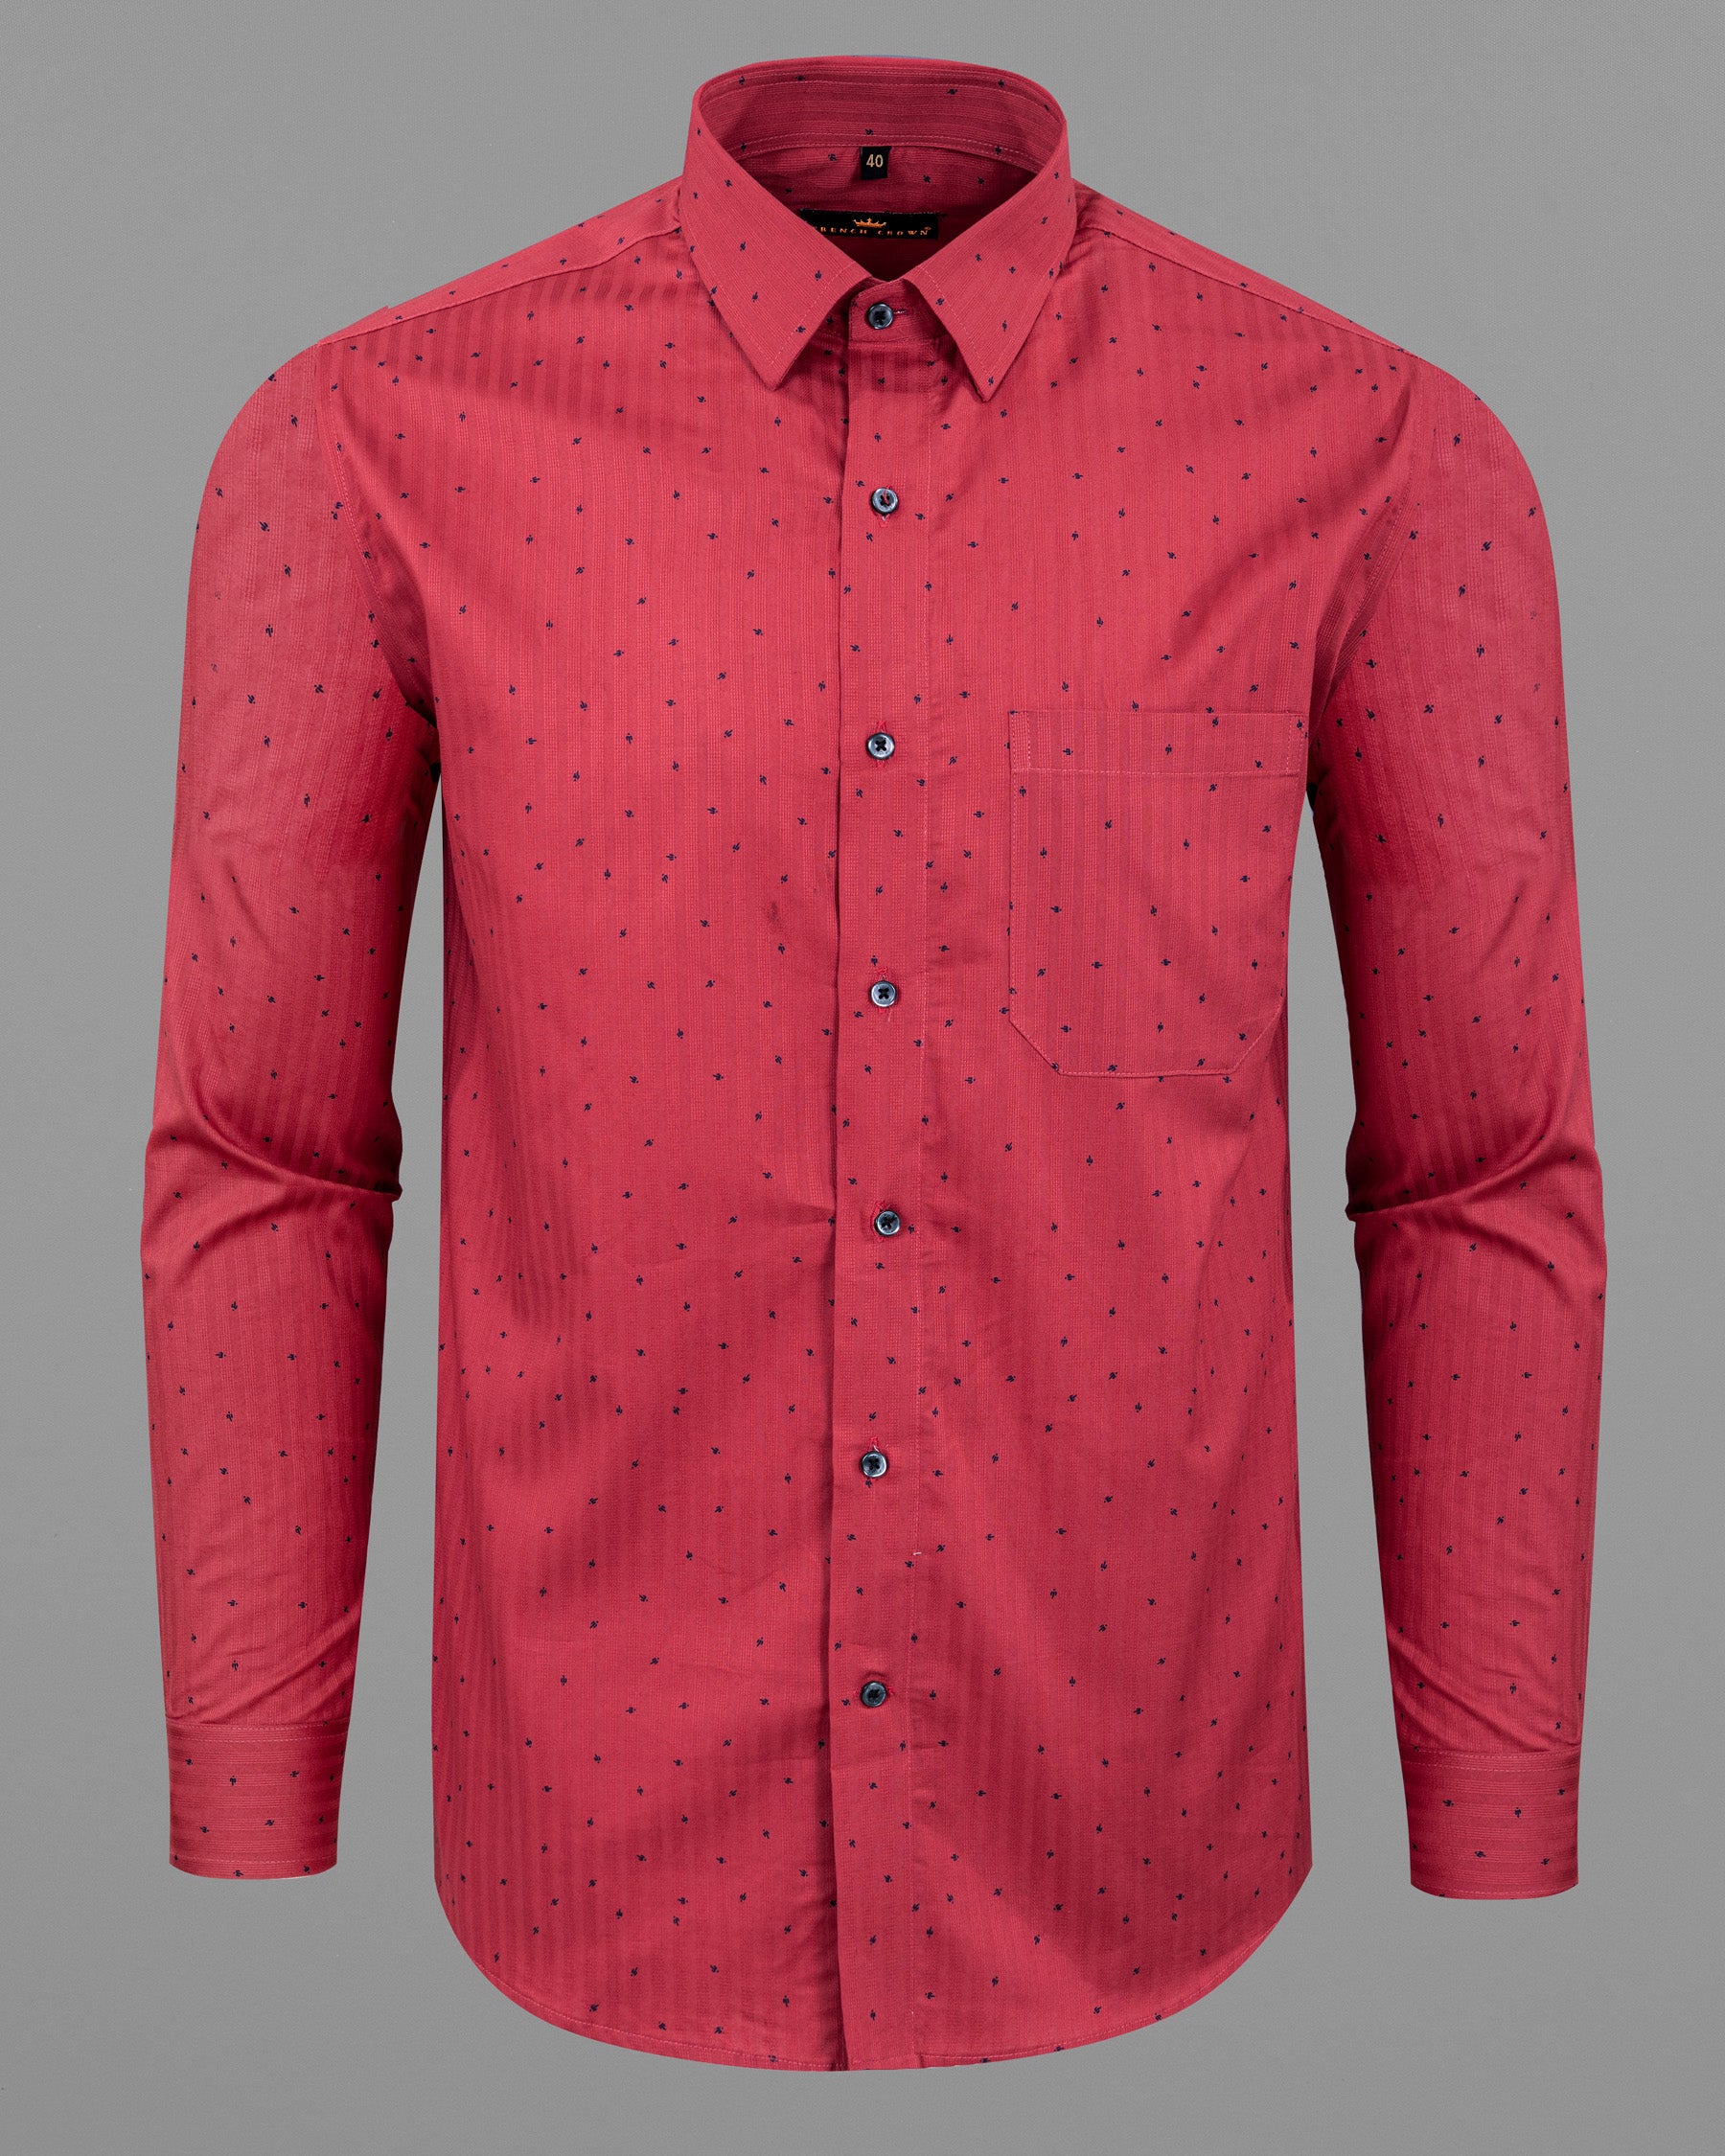 Cranberry Red Striped Royal Oxford Shirt 5666-BLE-38, 5666-BLE-H-38, 5666-BLE-39, 5666-BLE-H-39, 5666-BLE-40, 5666-BLE-H-40, 5666-BLE-42, 5666-BLE-H-42, 5666-BLE-44, 5666-BLE-H-44, 5666-BLE-46, 5666-BLE-H-46, 5666-BLE-48, 5666-BLE-H-48, 5666-BLE-50, 5666-BLE-H-50, 5666-BLE-52, 5666-BLE-H-52